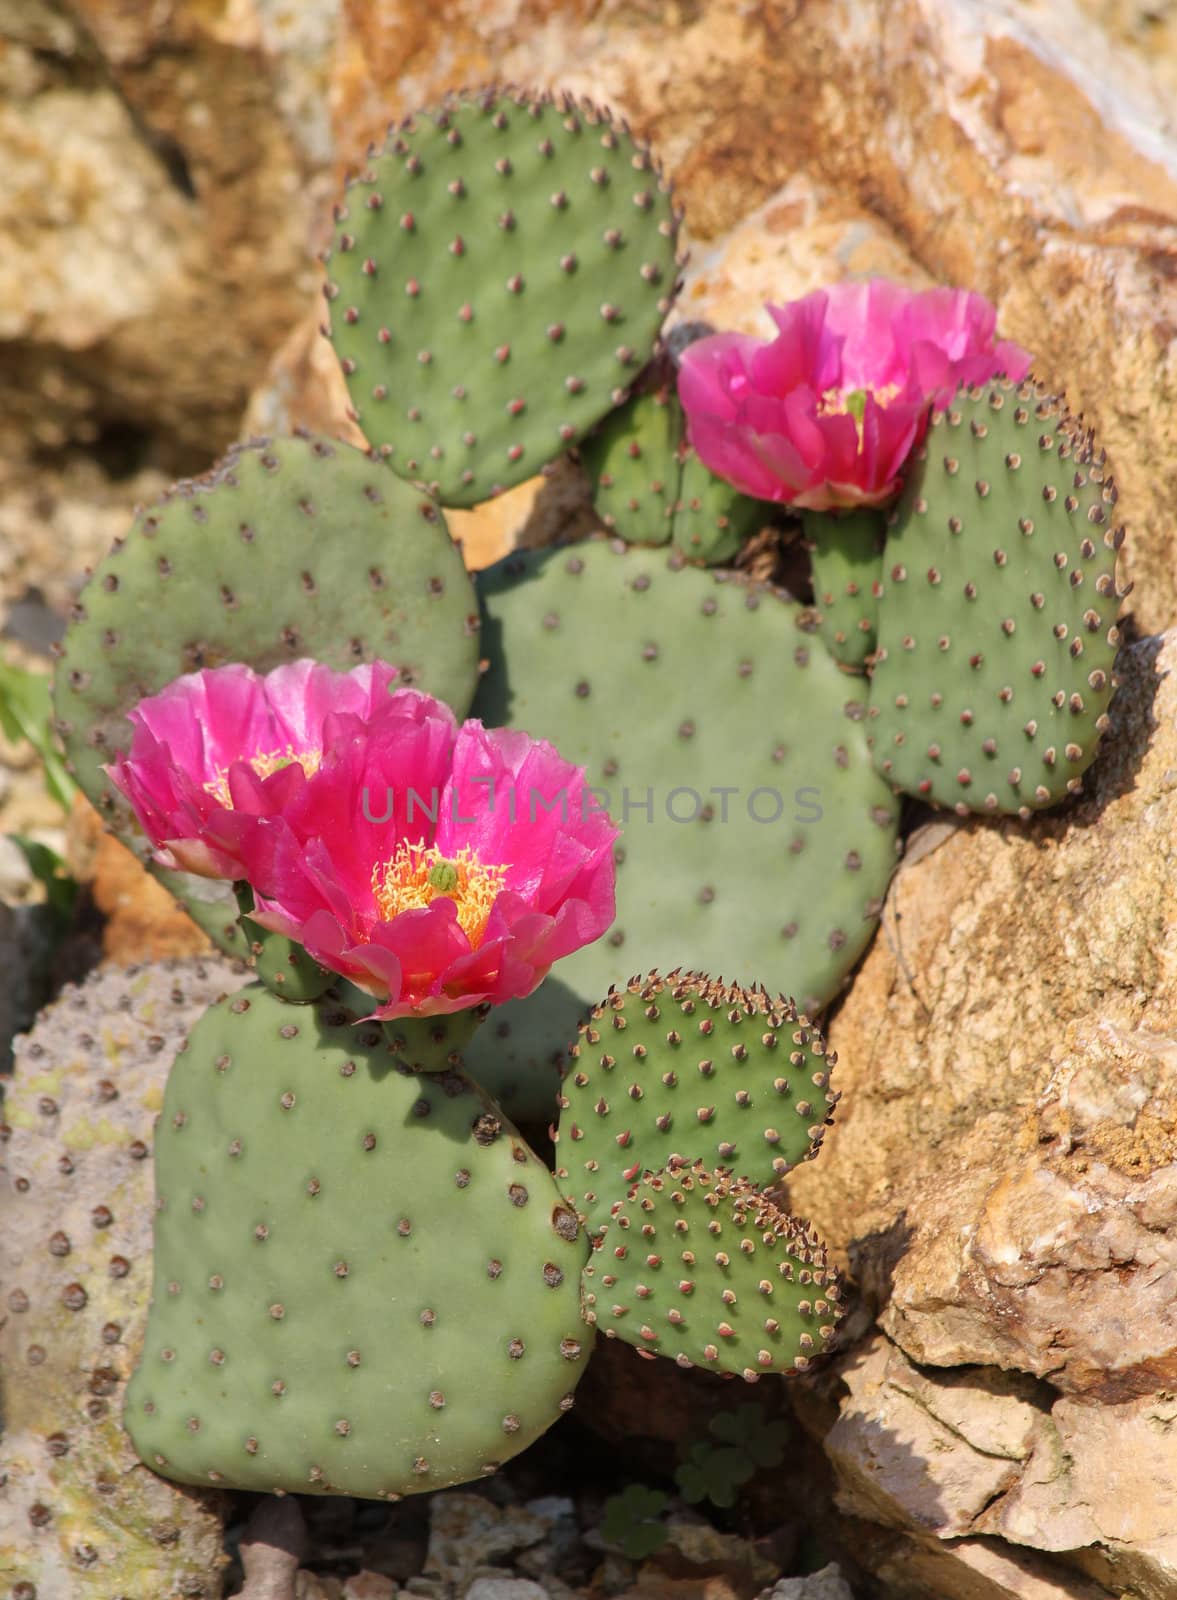 A purple-flowered cactus and desert stones.